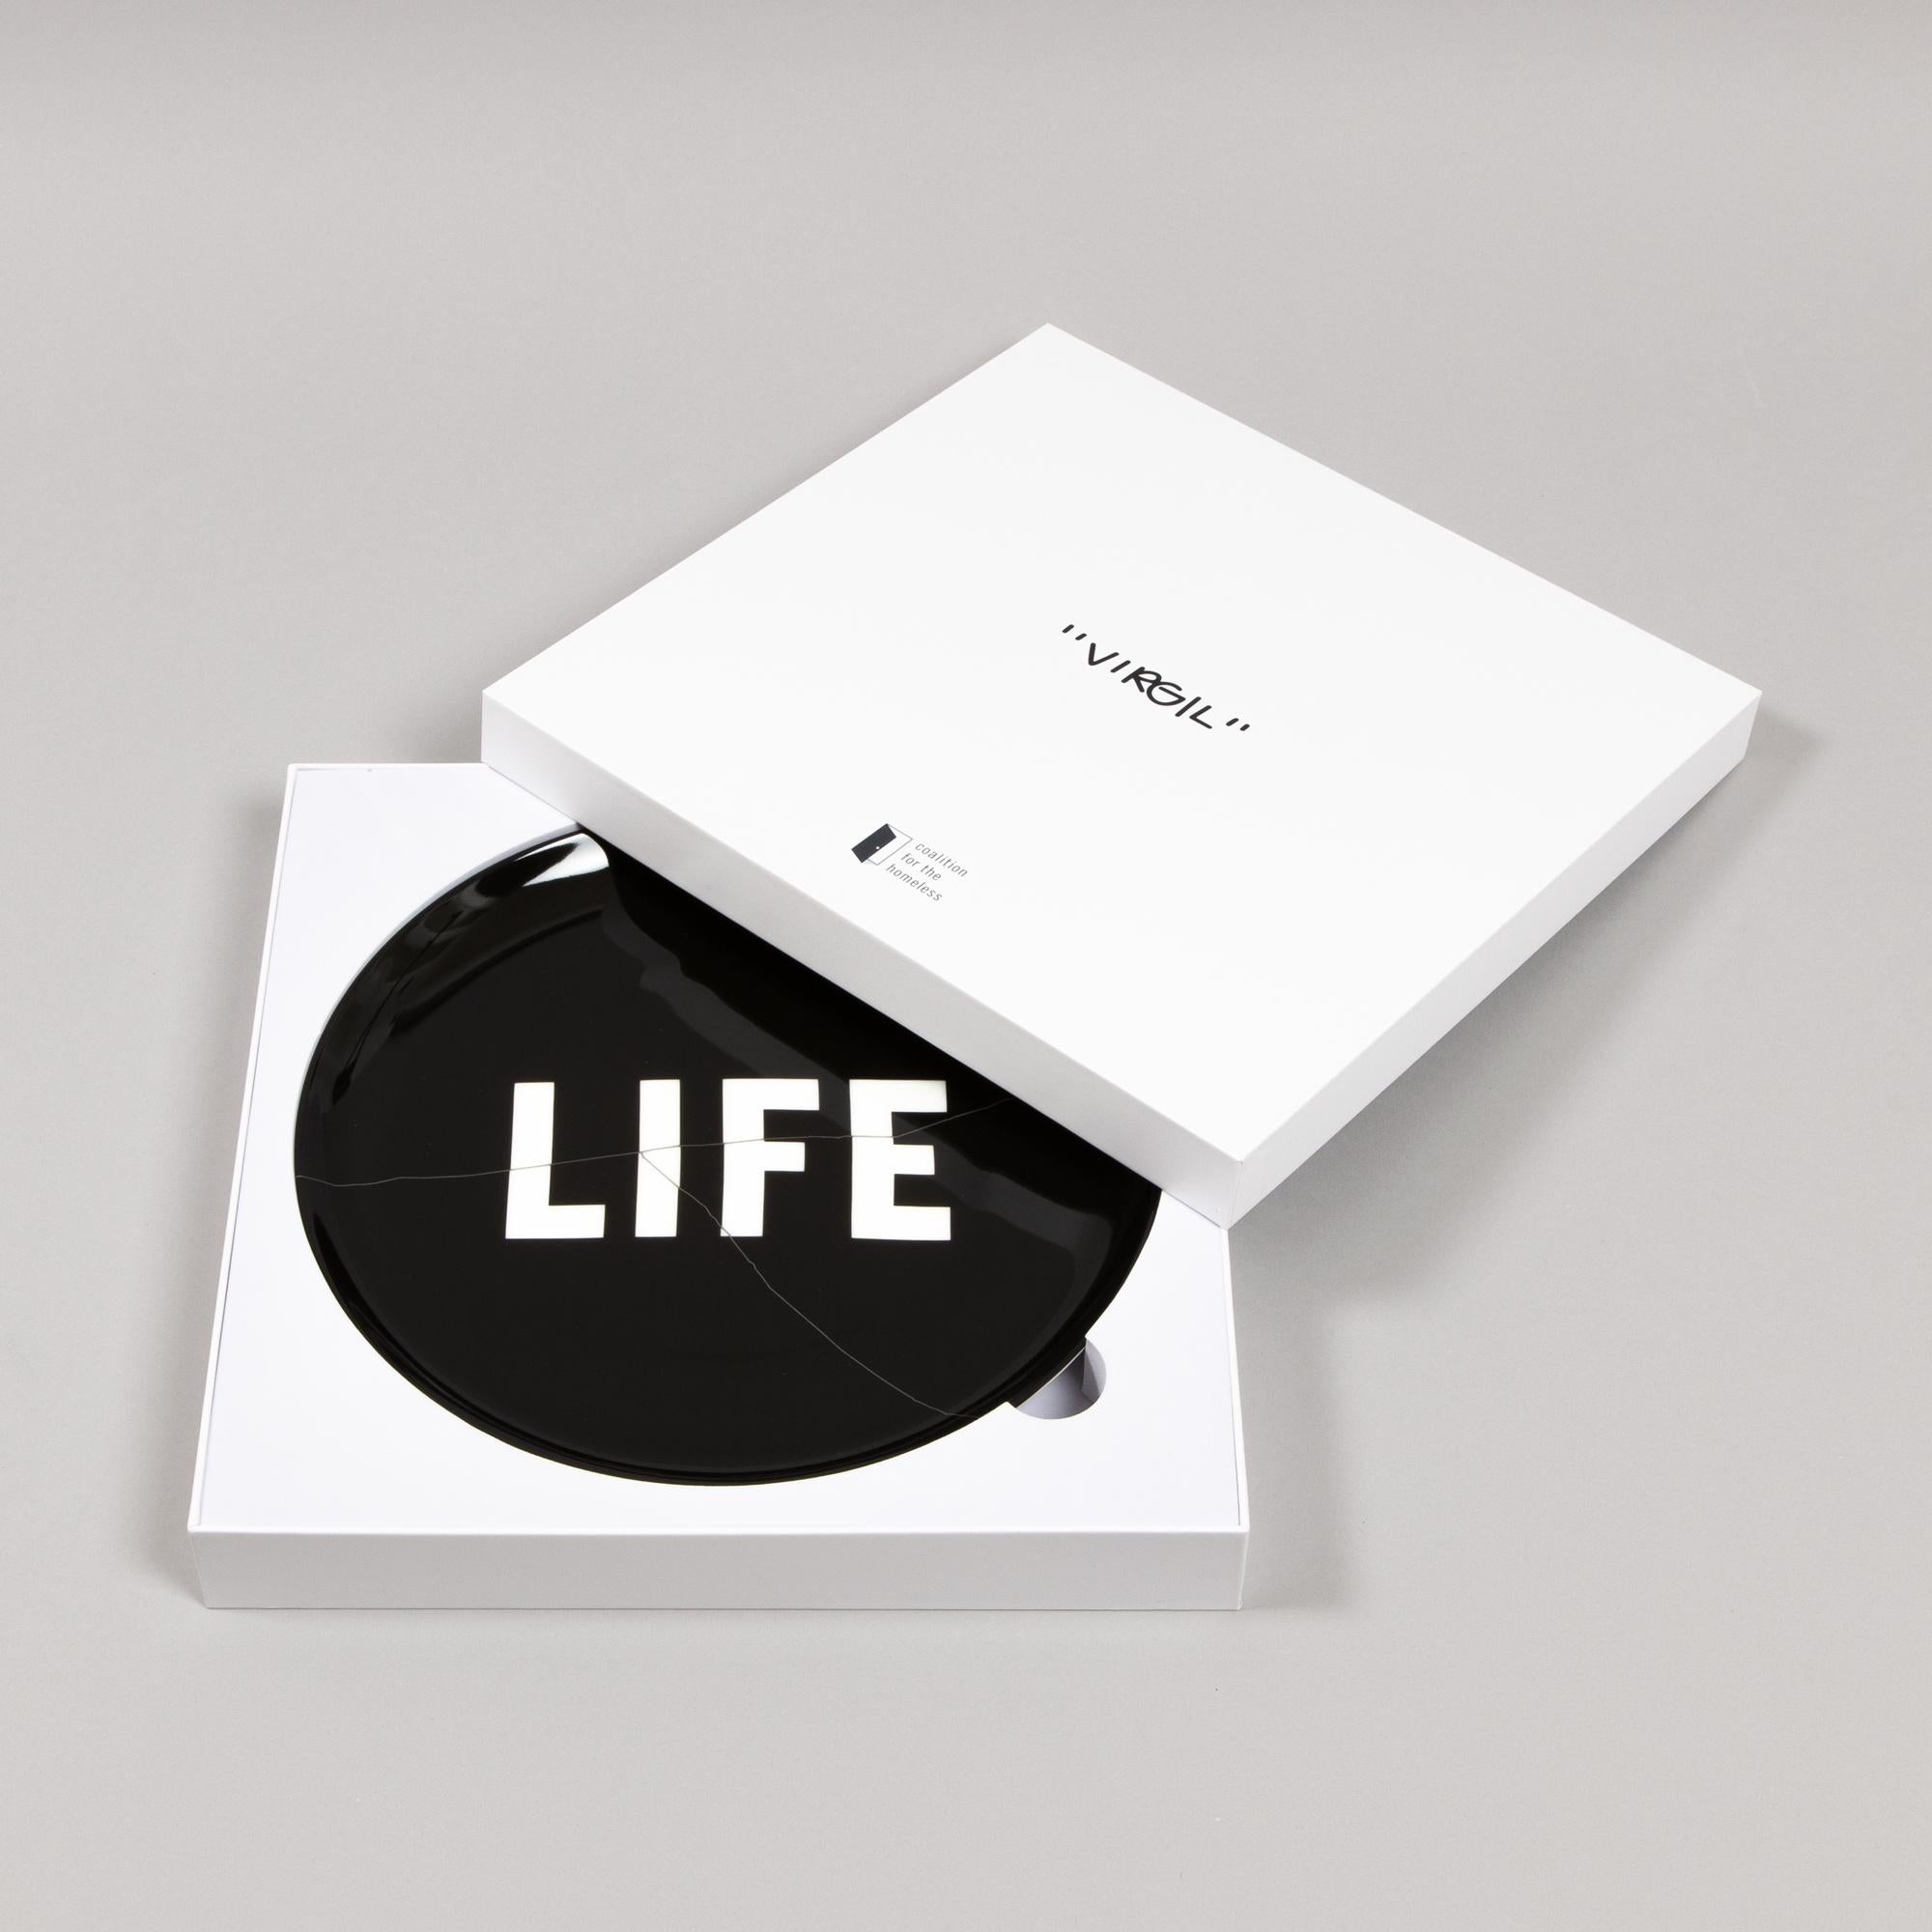 Virgil Abloh, Life Itself - Limited Edition Plate, Contemporary Art For Sale 2